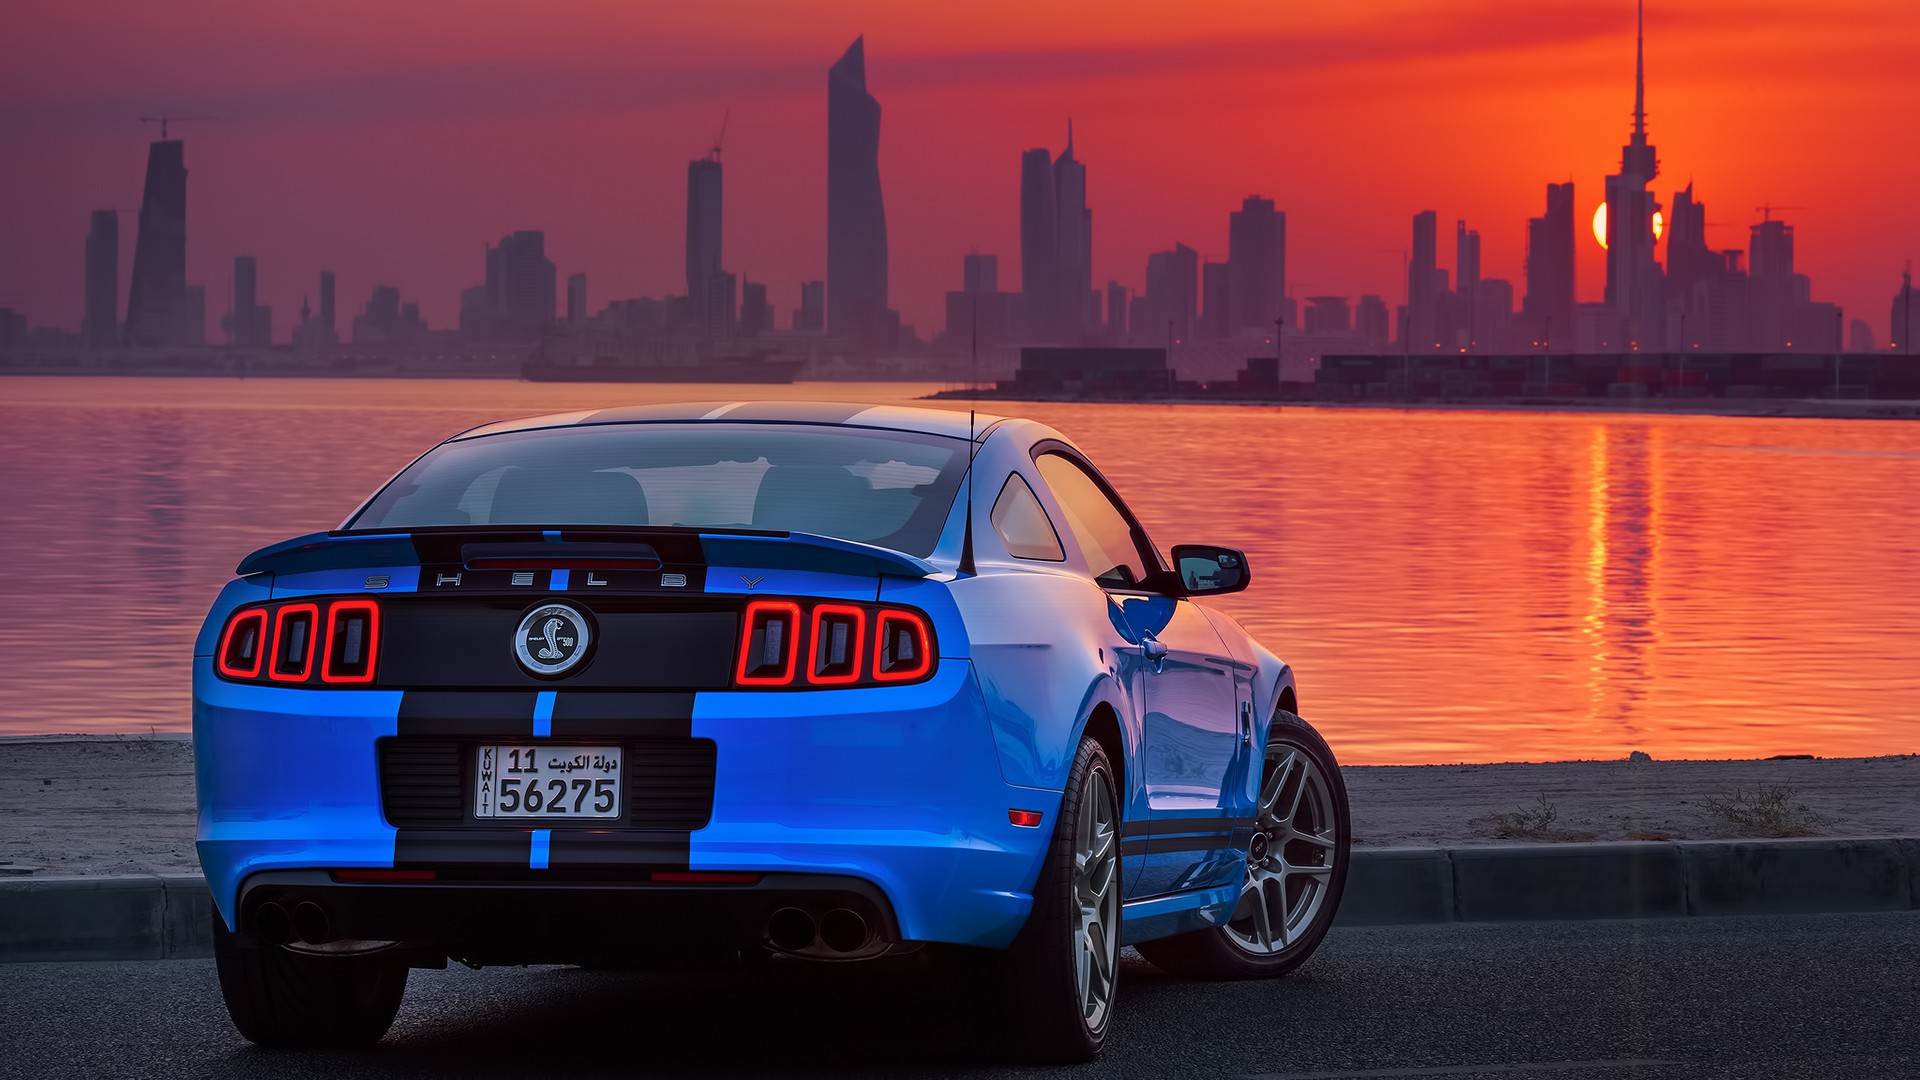 Shelby GT500 Ford USA Car Ford Mustang Shelby Kuwait Blue Cars 1920x1080